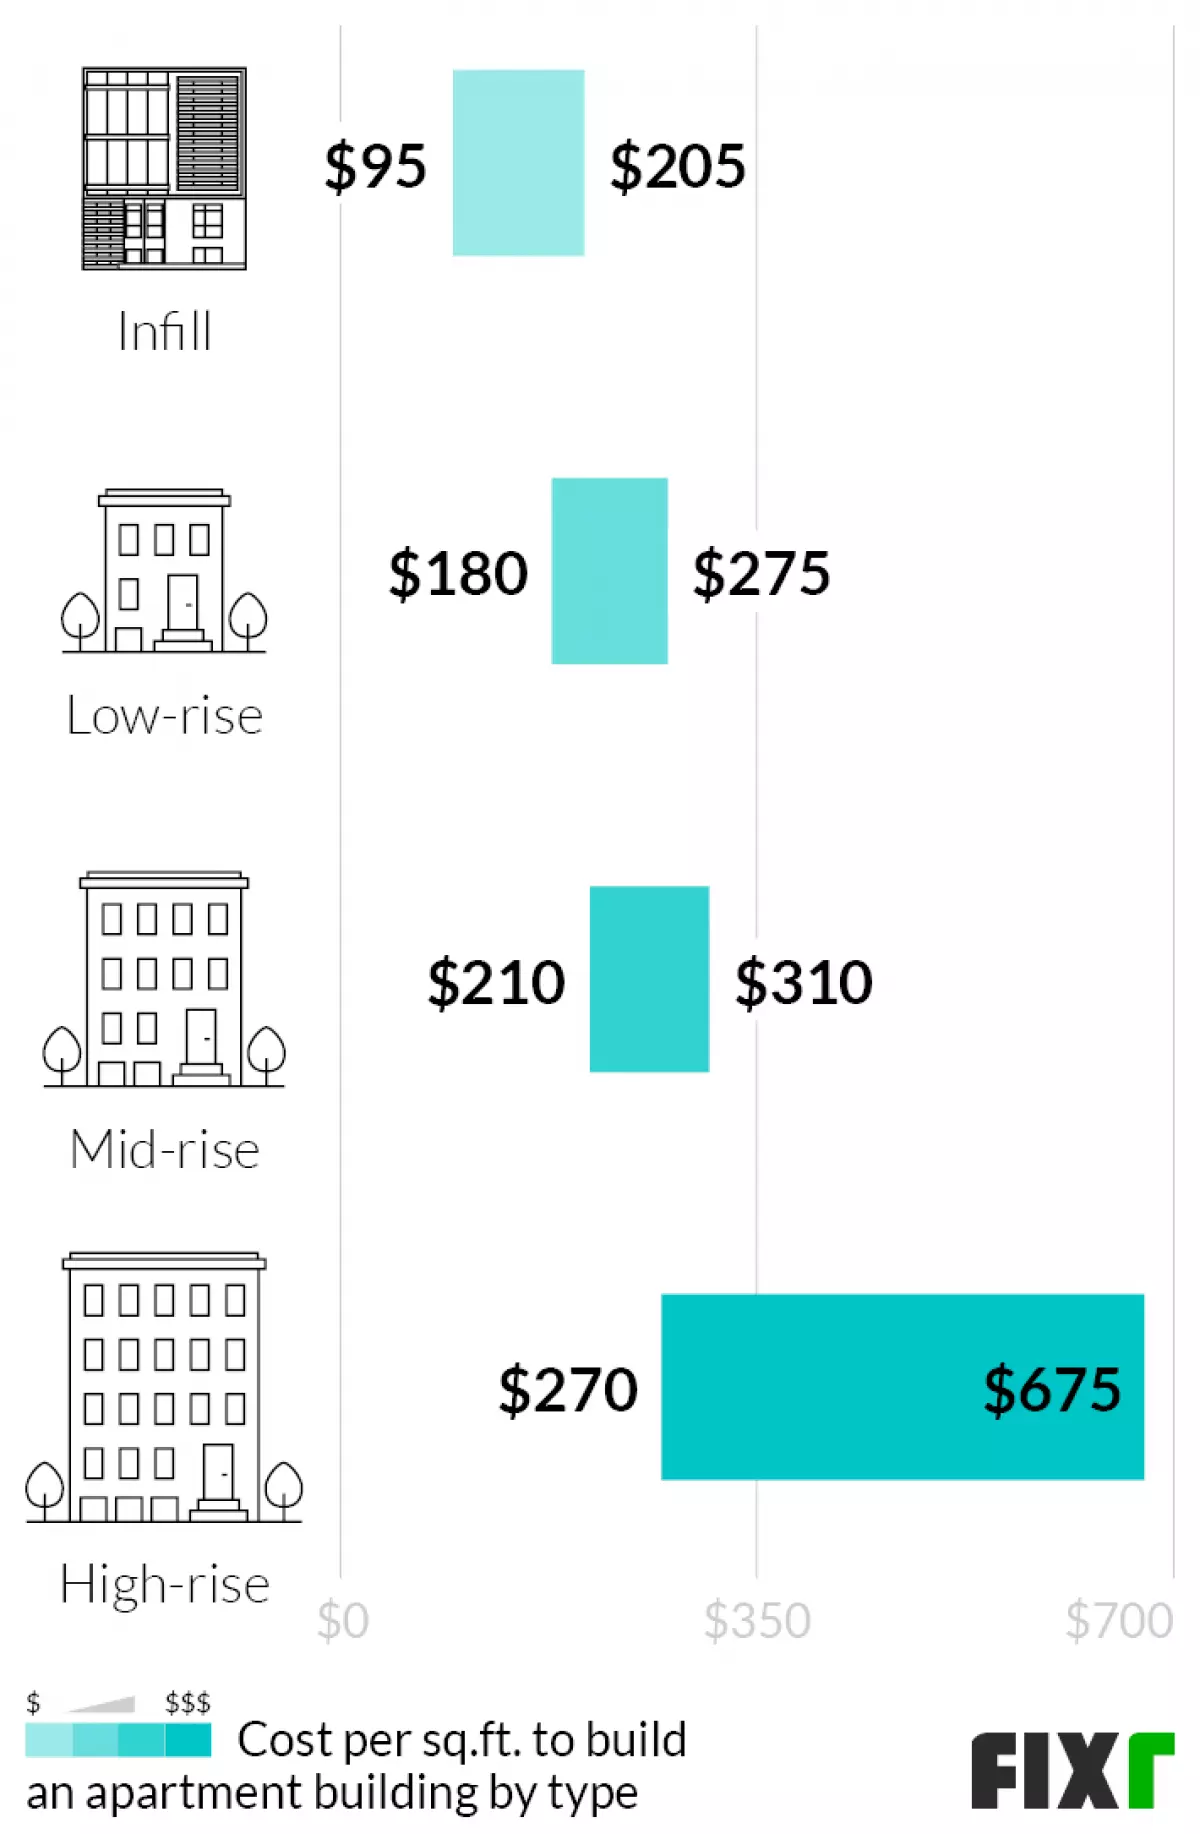 Cost per sq.ft. of an infill, low-rise, mid-rise and high-rise apartment building